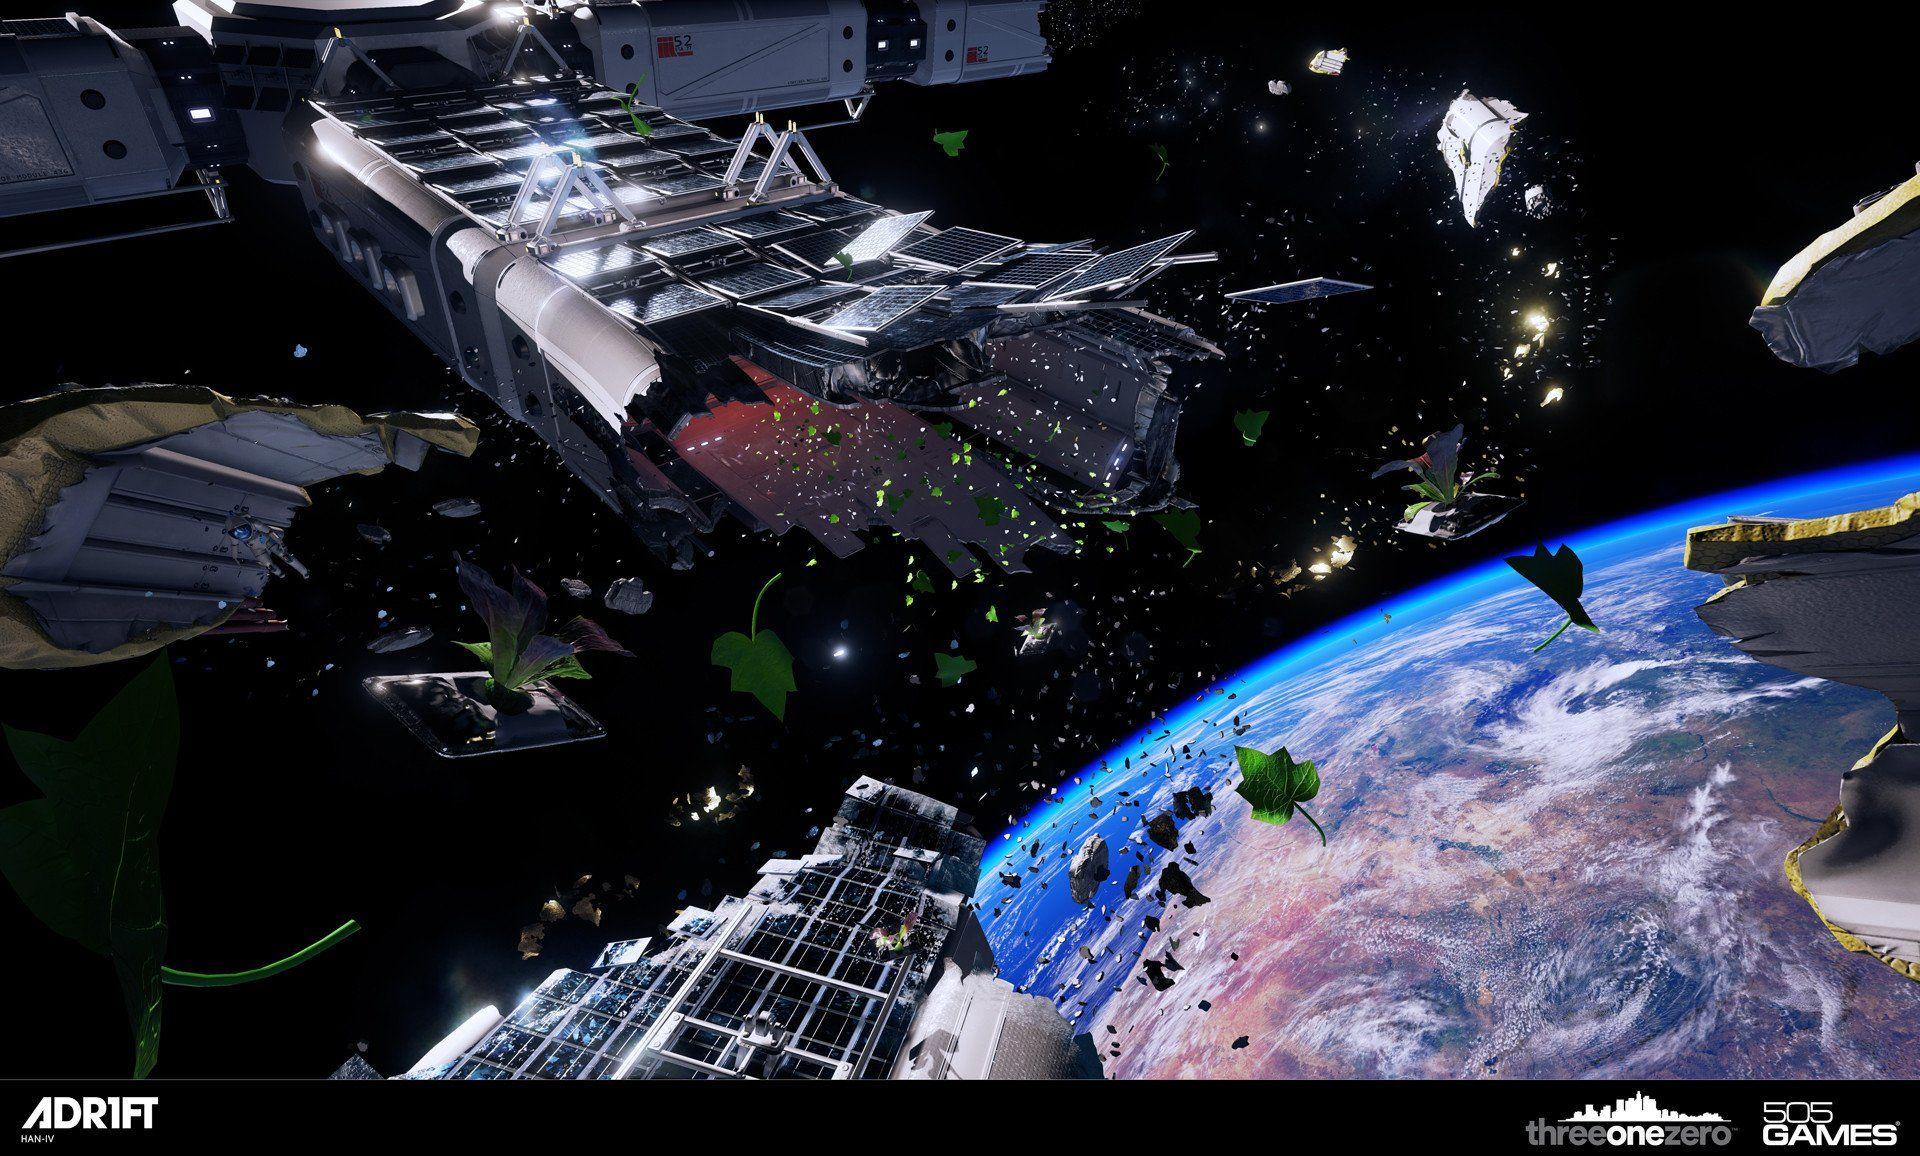 ADR1FT Full HD Wallpaper and Background Imagex1156